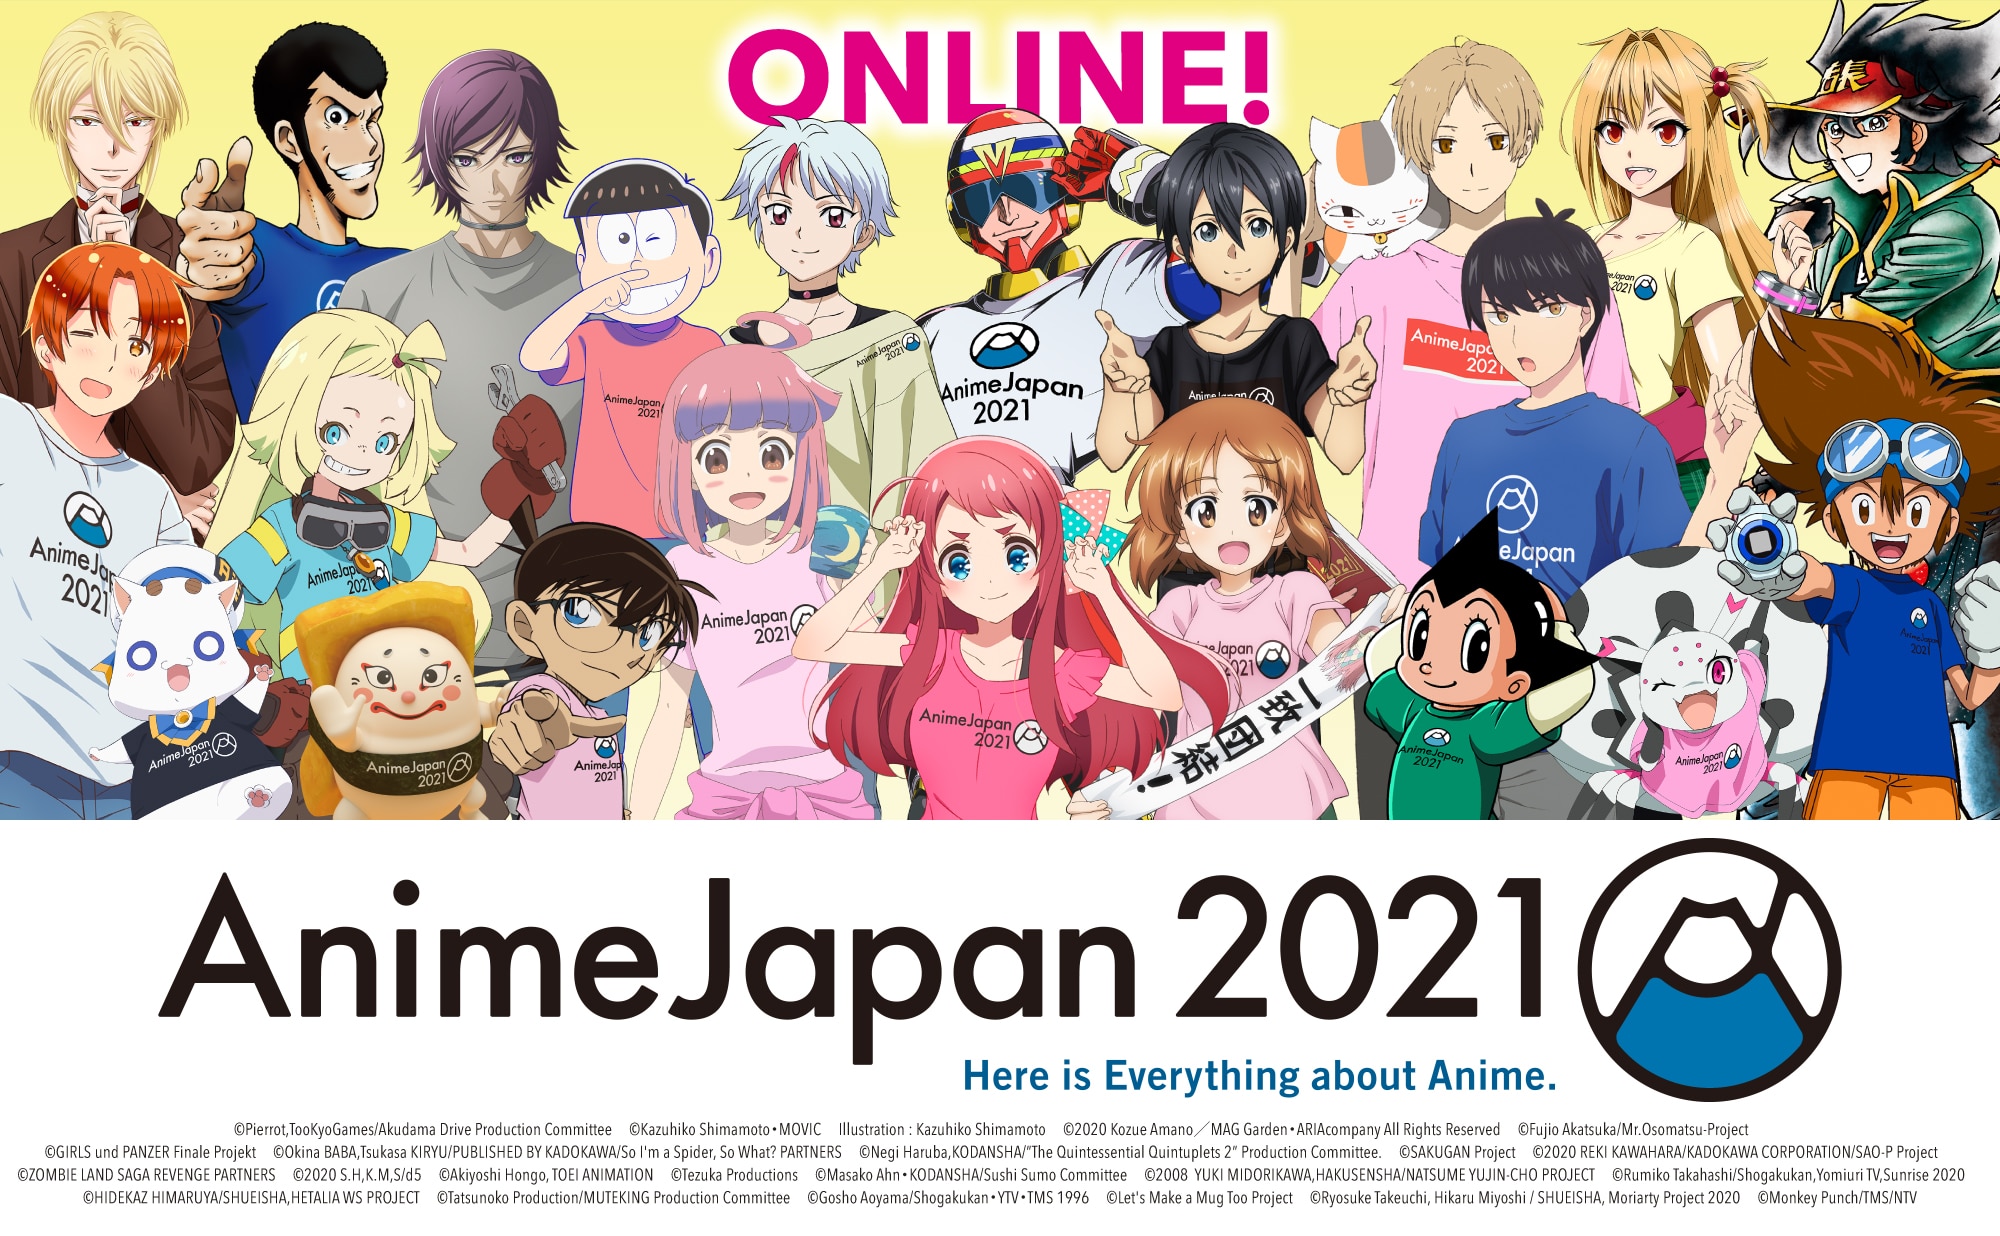 Netflix Anime stage at Anime Japan 2023: Timing, cast, what to